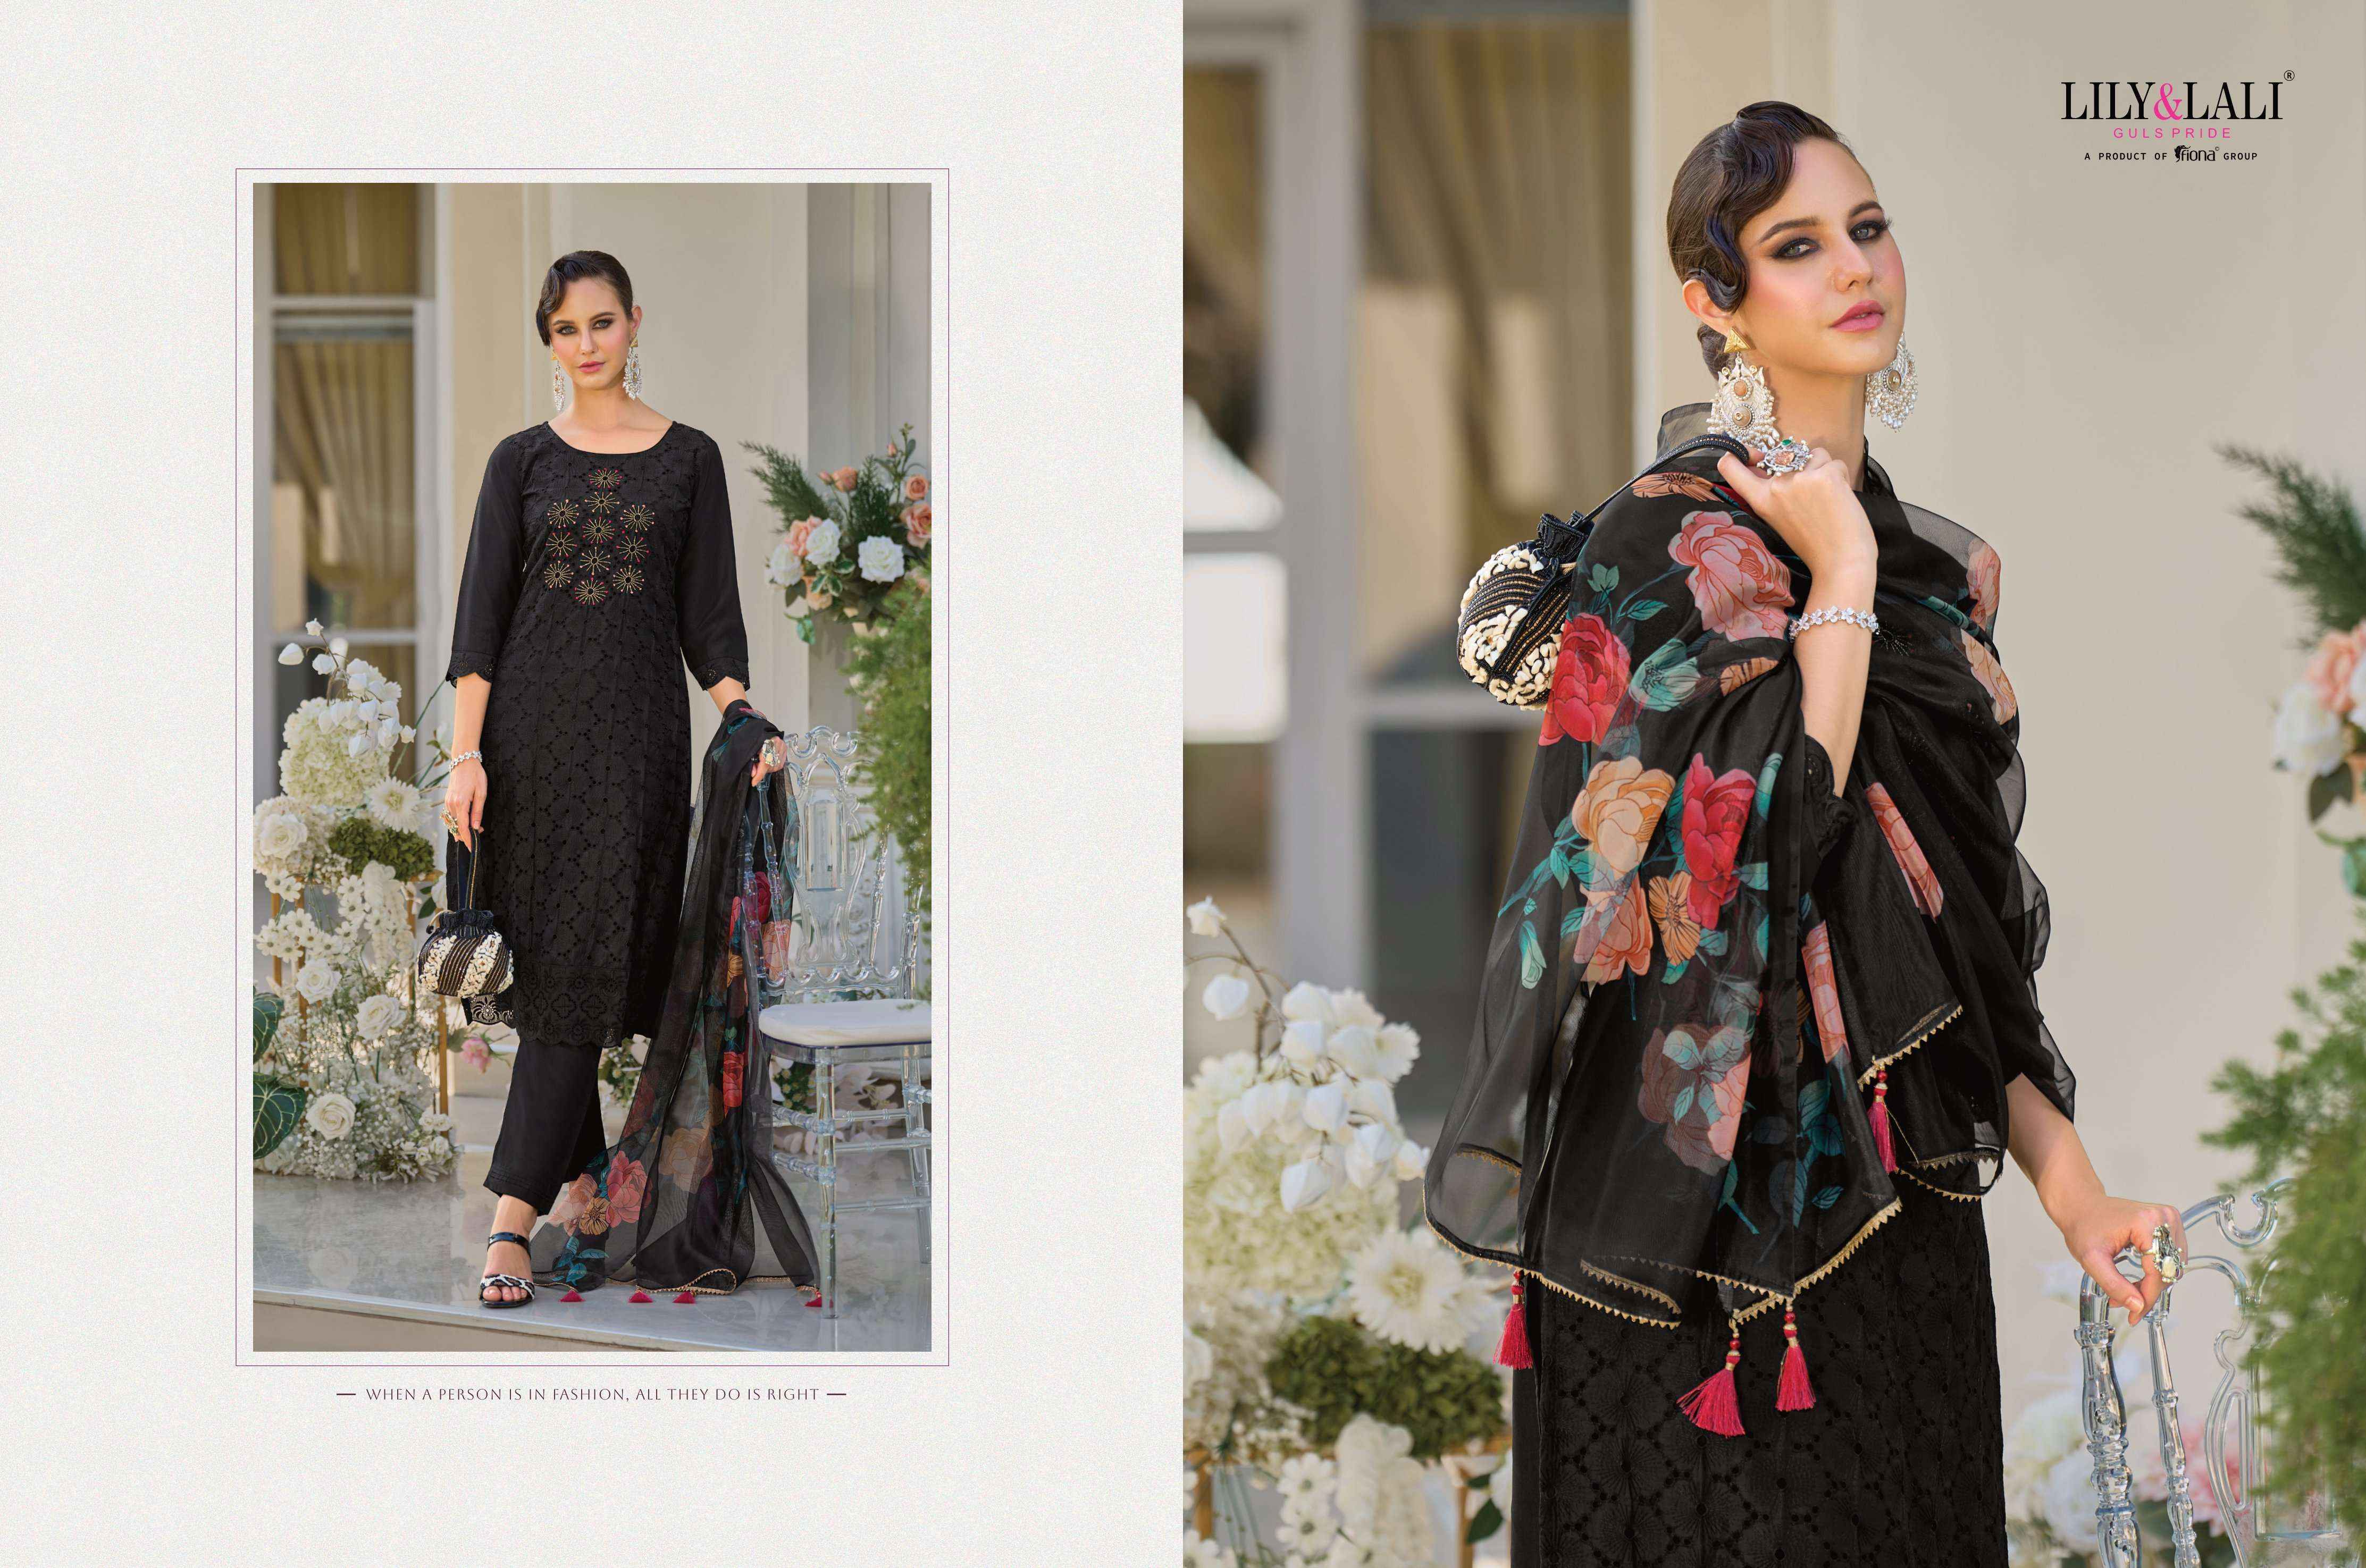 Lily & Lali Karachi Readymade Designer Suits - Wholesale Factory Price